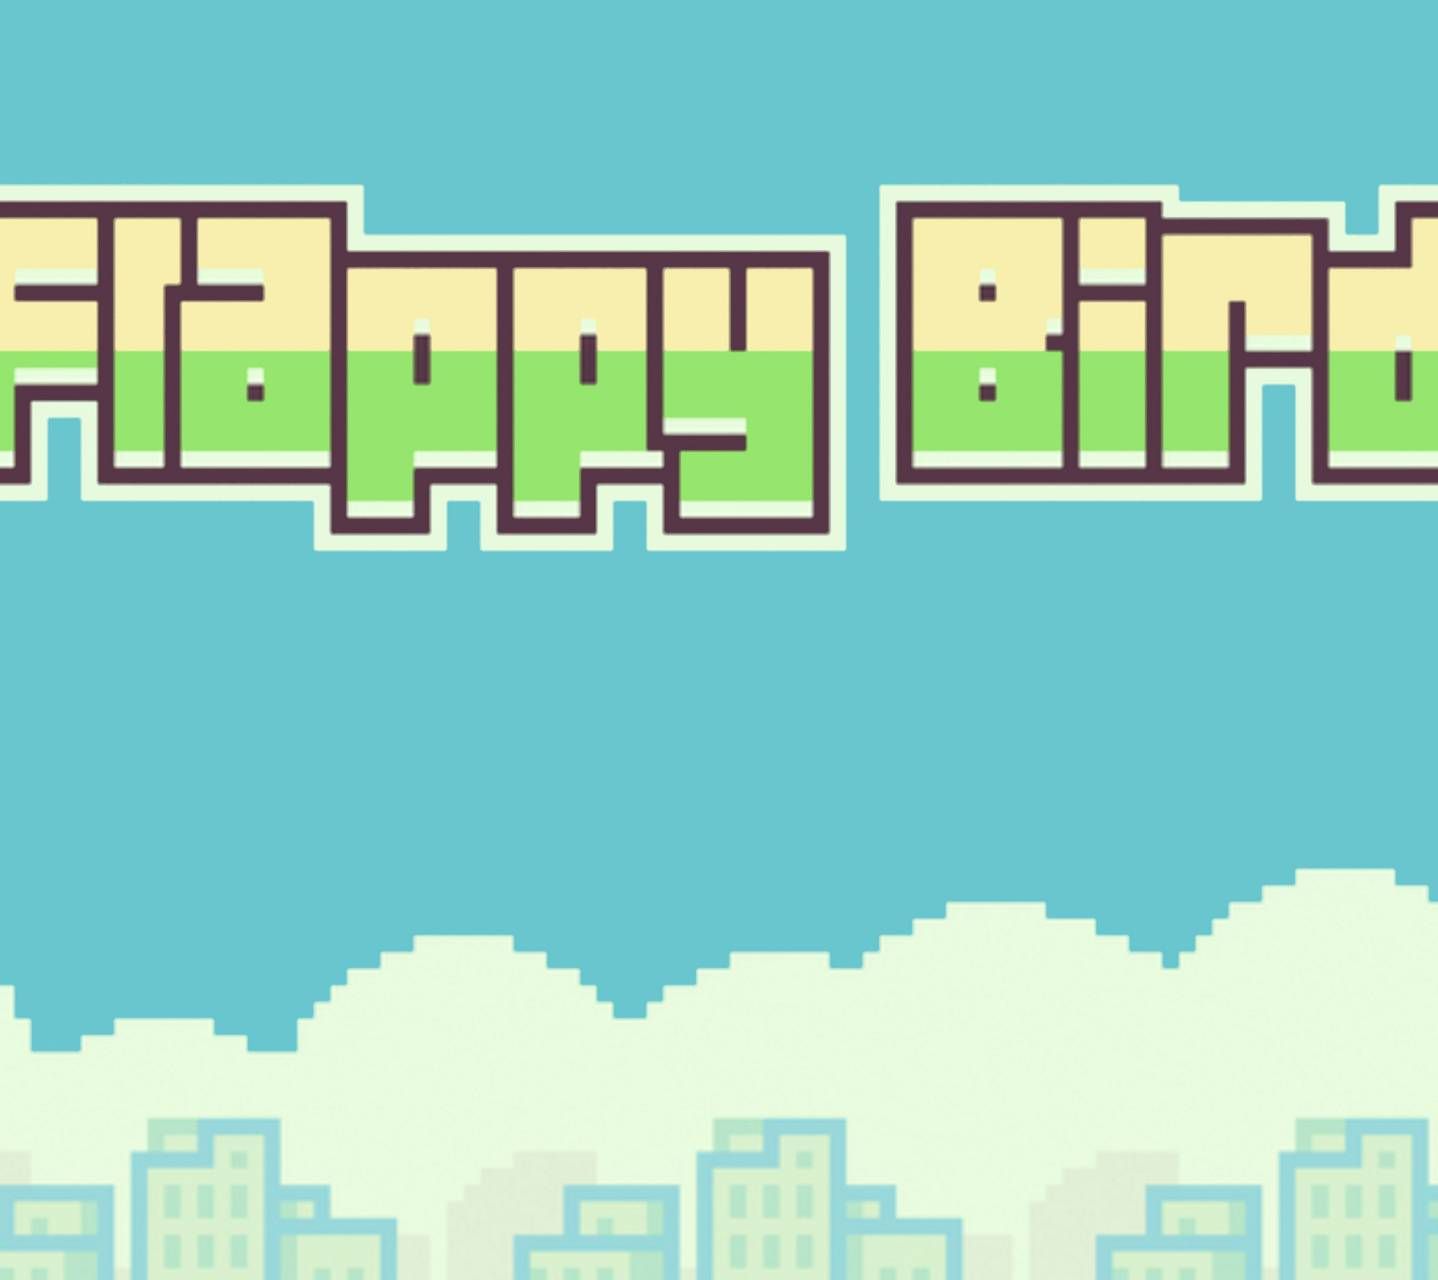 Flappy Bird Backdrop Wallpapers